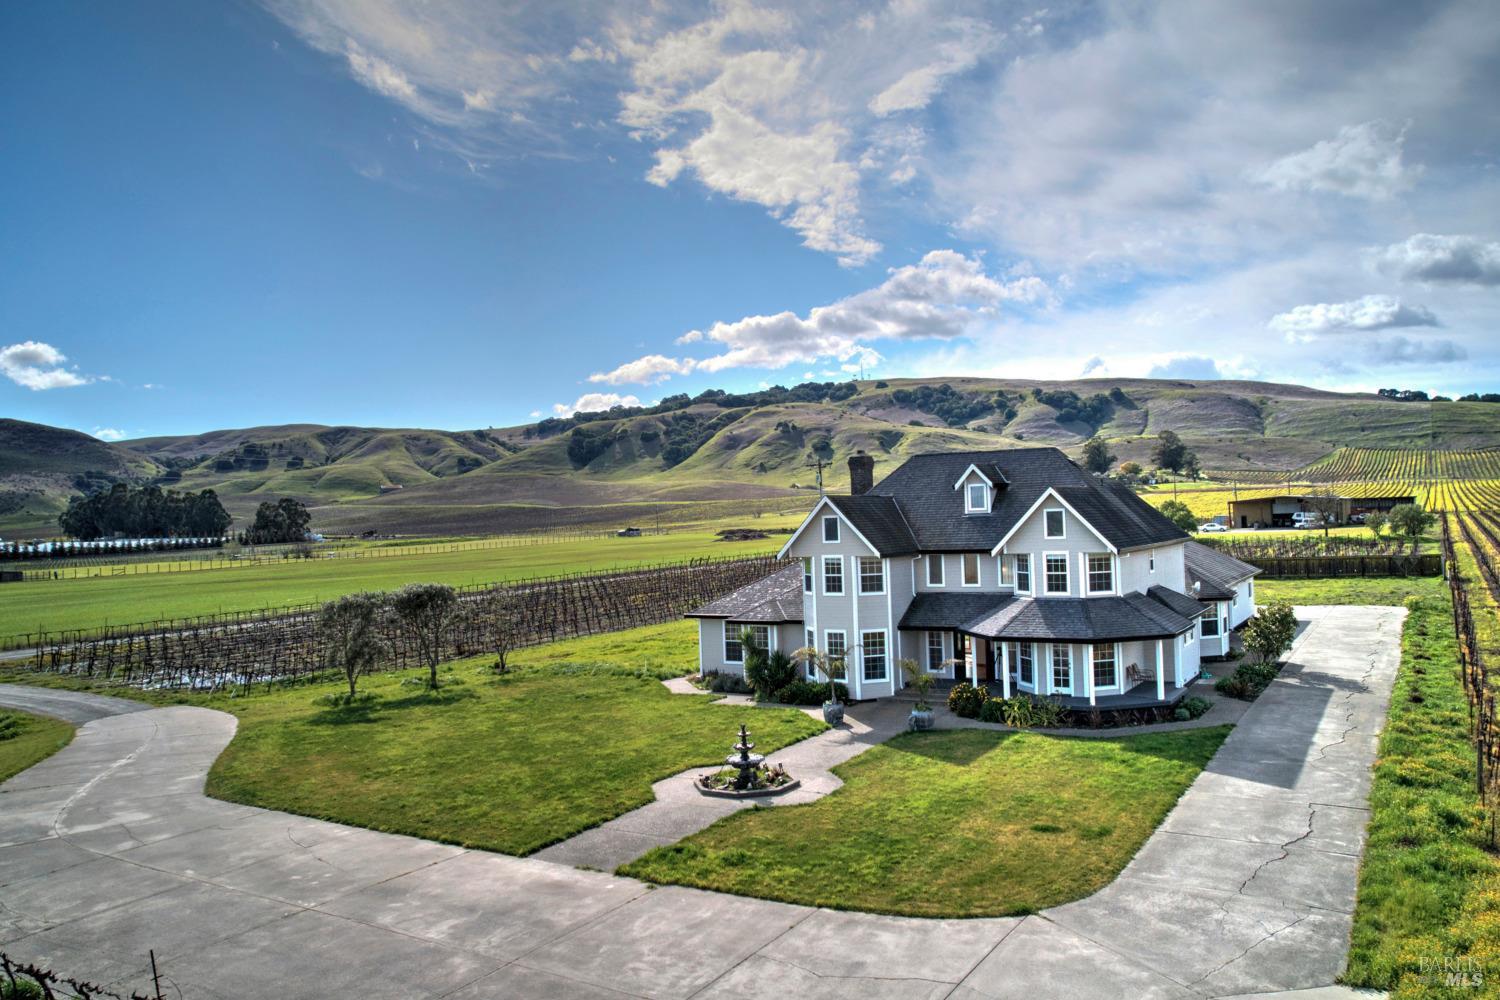 Photo of 22033 Bonness Rd in Sonoma, CA